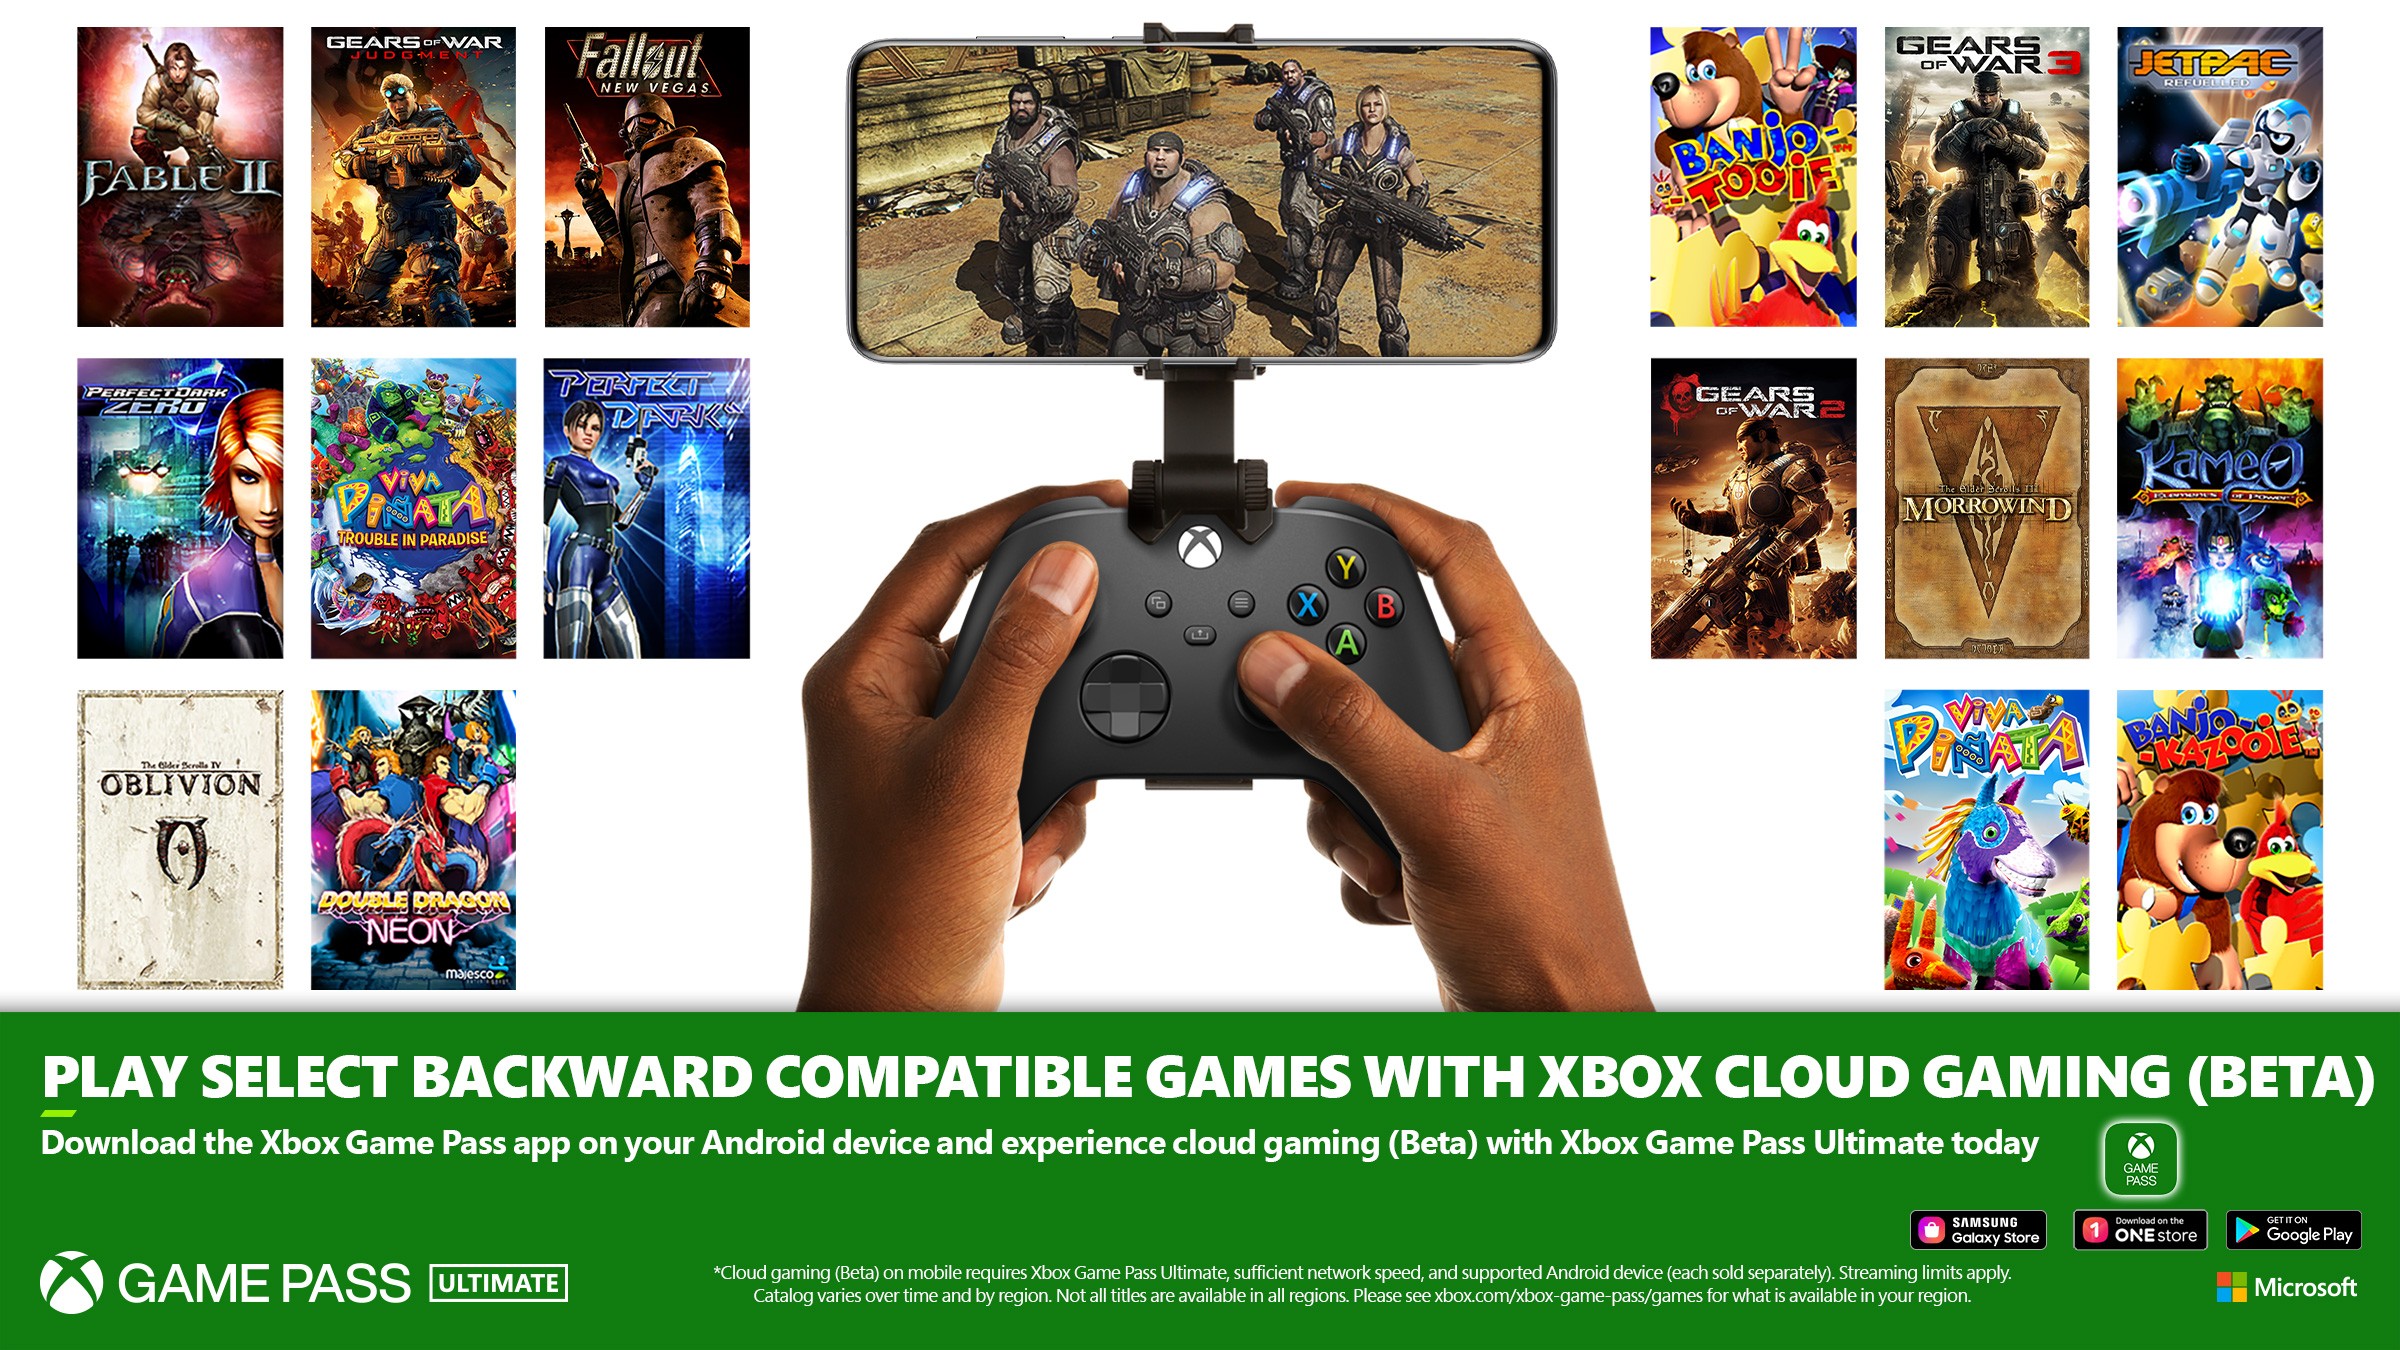 Xbox Game Pass cloud gaming arrives on consoles